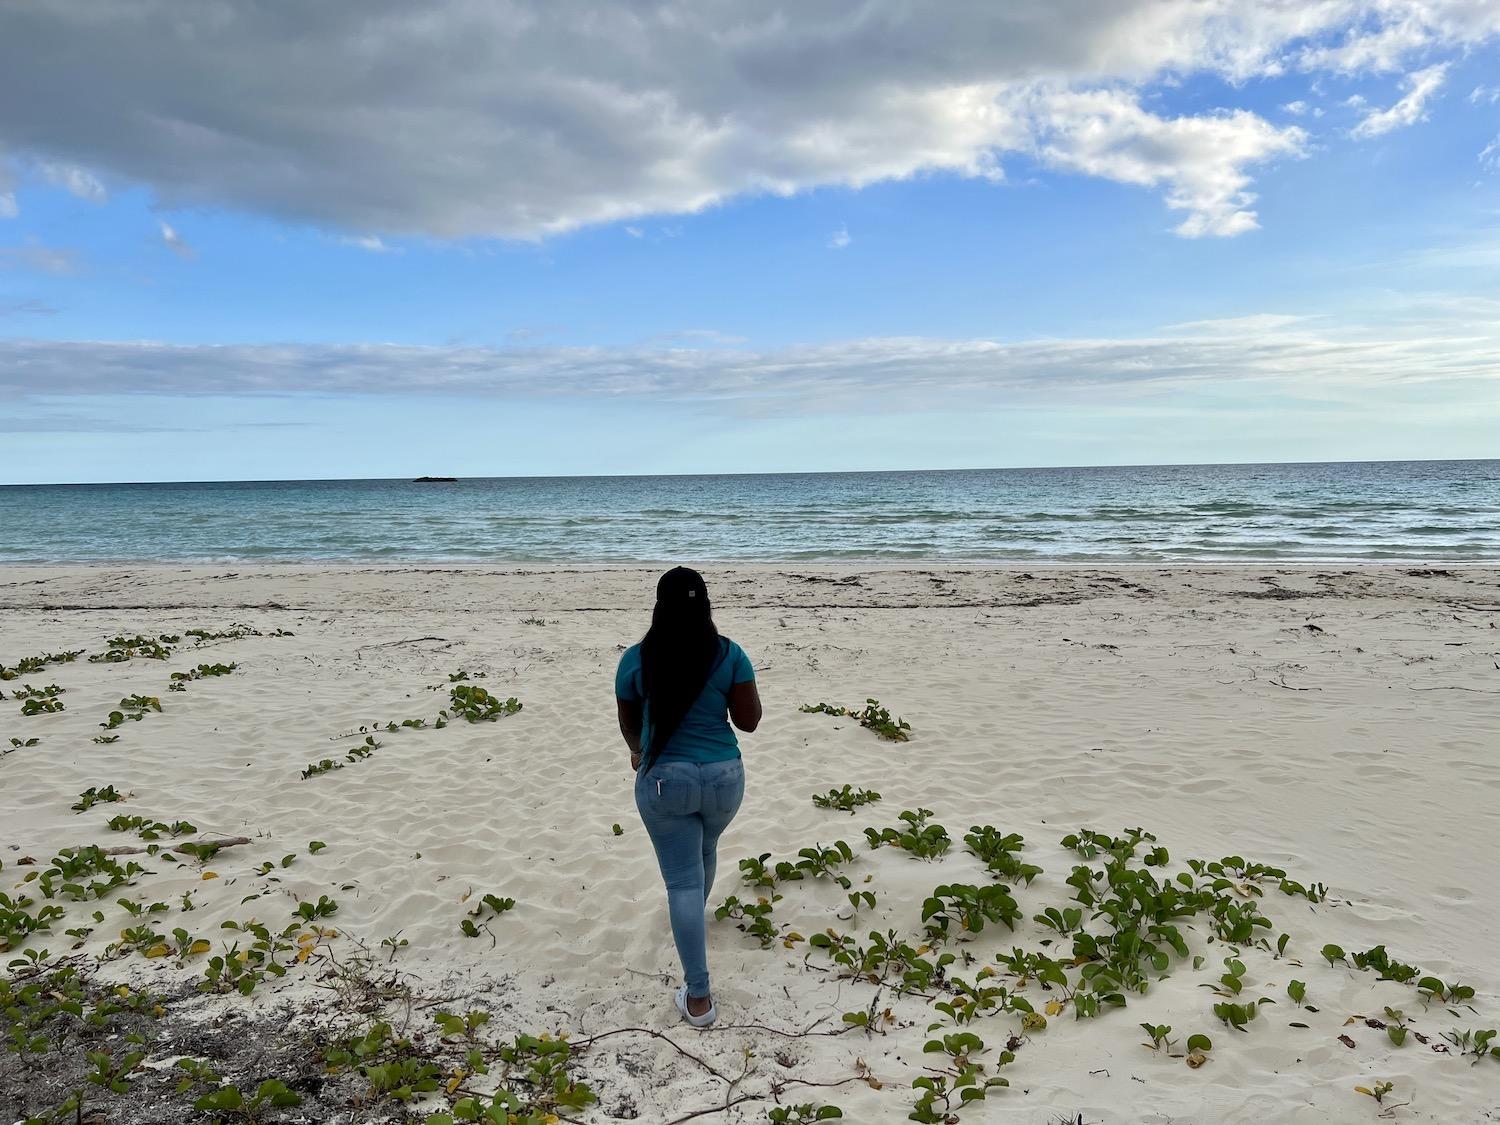 Gabrielle Moxey, of the Bahamas Ministry of Tourism, shows off Gold Rock Beach at Lucayan National Park.